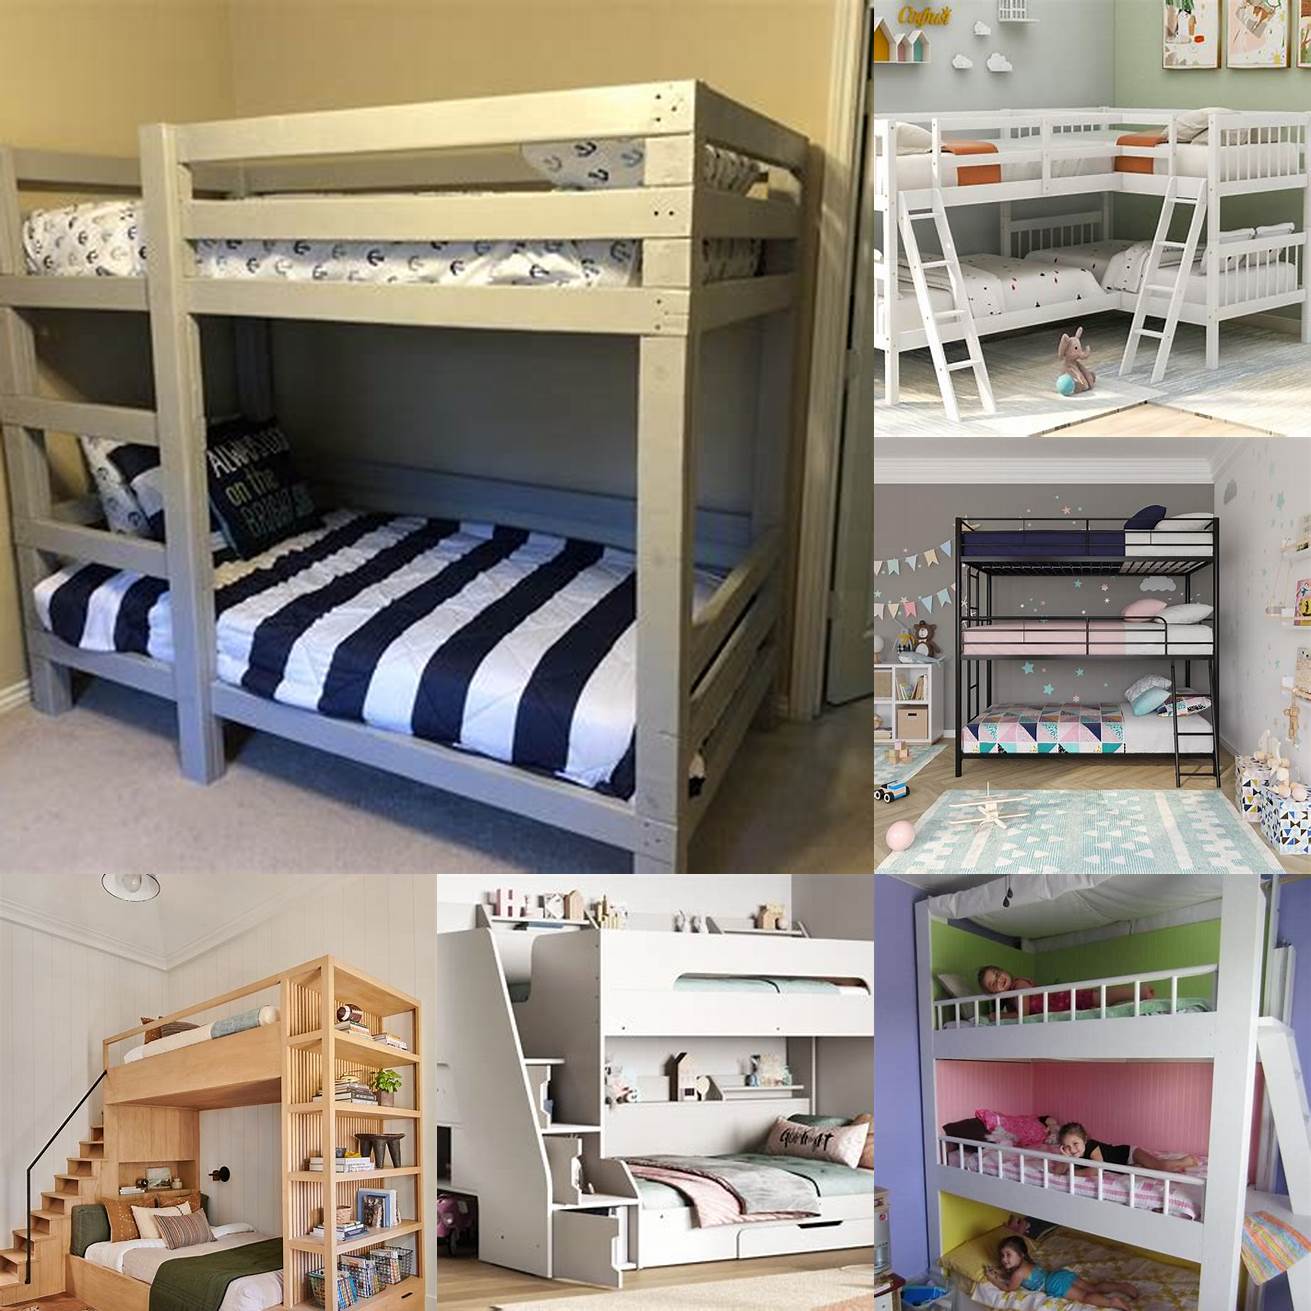 A bunk bed is a great way to save space and provide a fun sleeping area for siblings or sleepovers You can also use the bottom bunk as a play area or study space